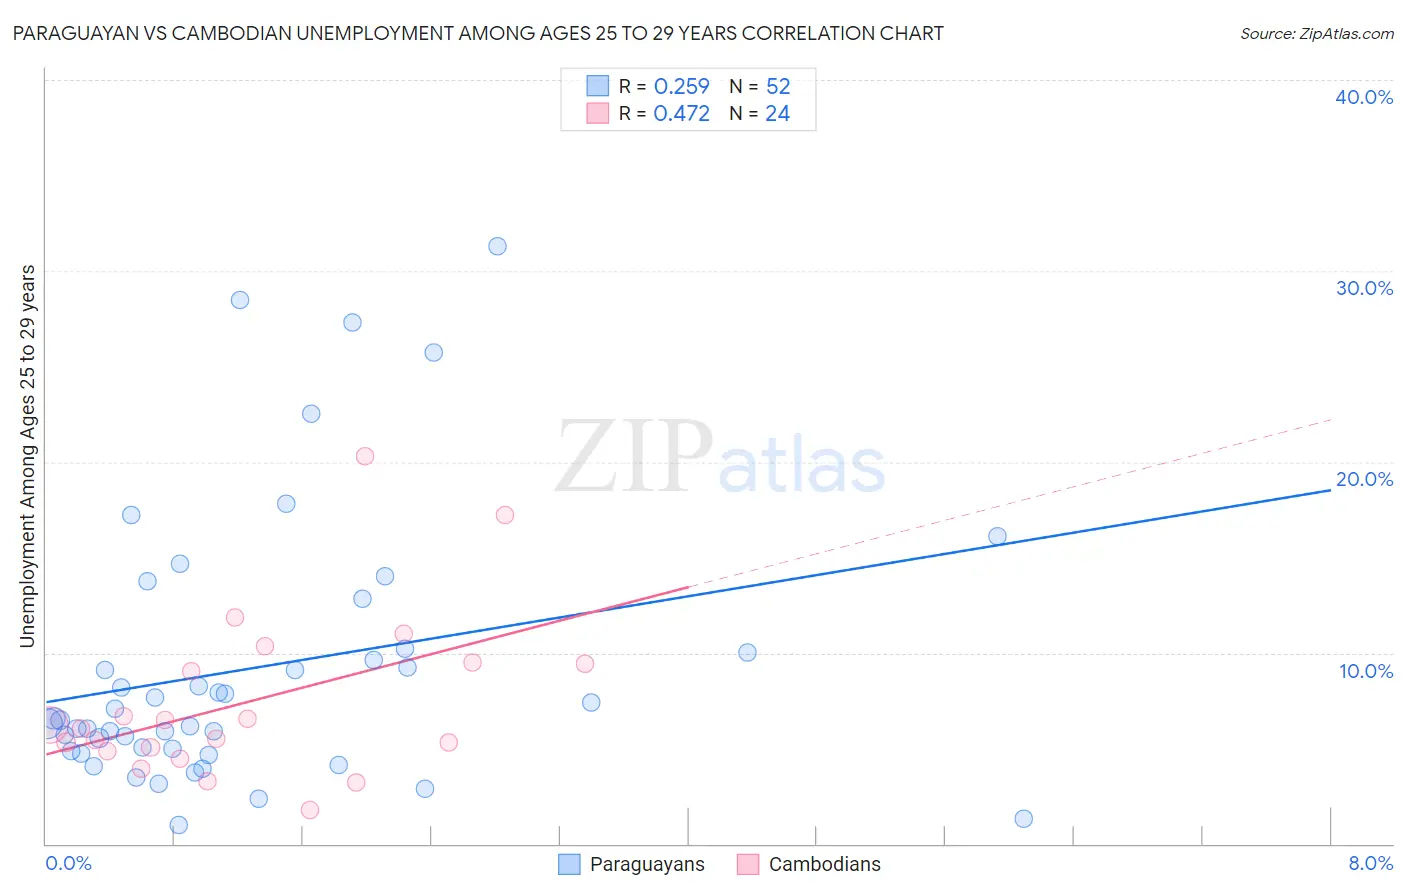 Paraguayan vs Cambodian Unemployment Among Ages 25 to 29 years